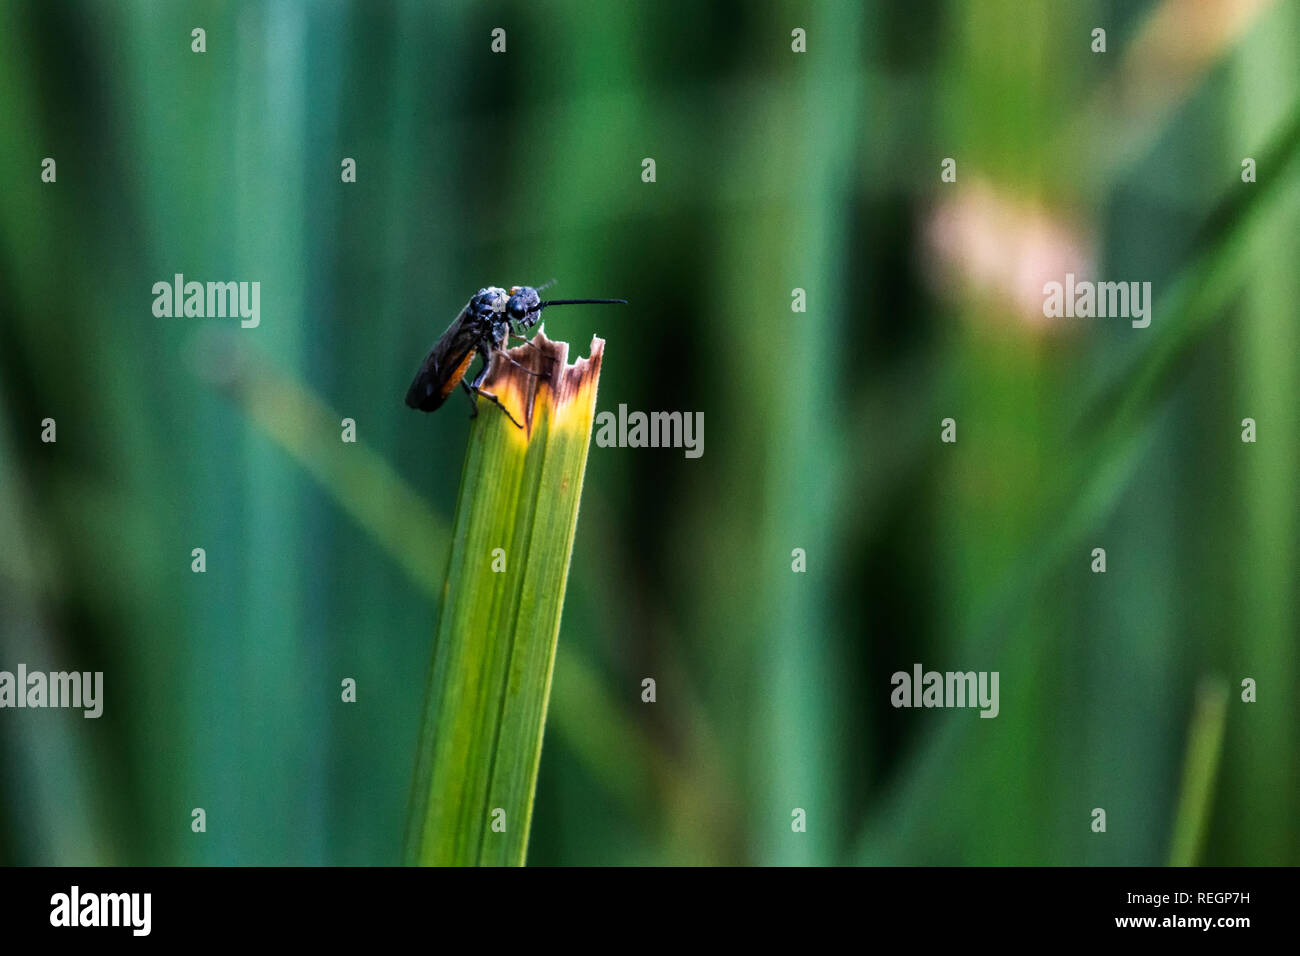 harebell carpenter-bee on a blade of grass Stock Photo